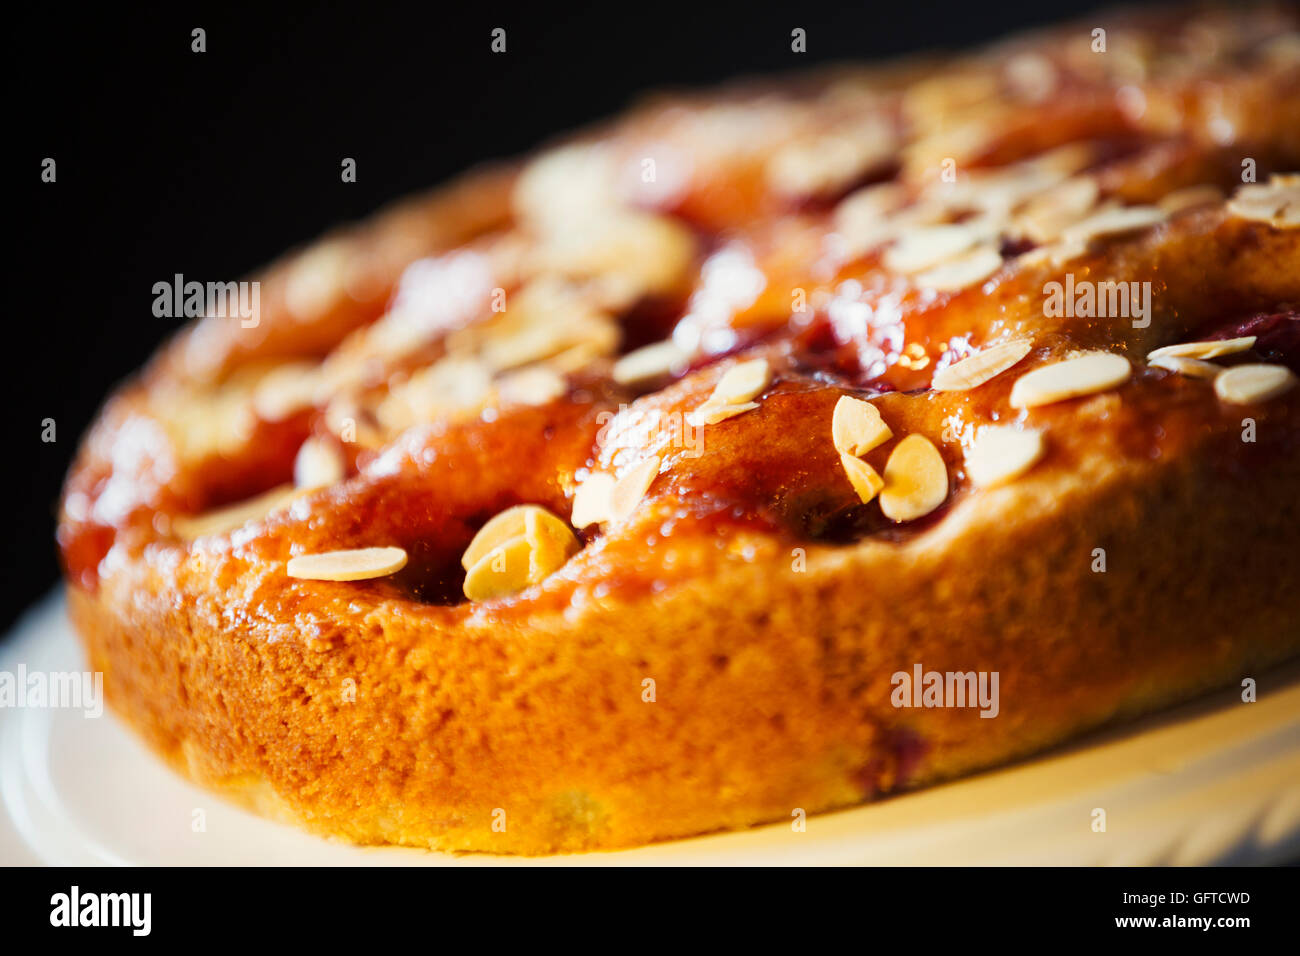 A fresh baked tart with almonds on the top Stock Photo